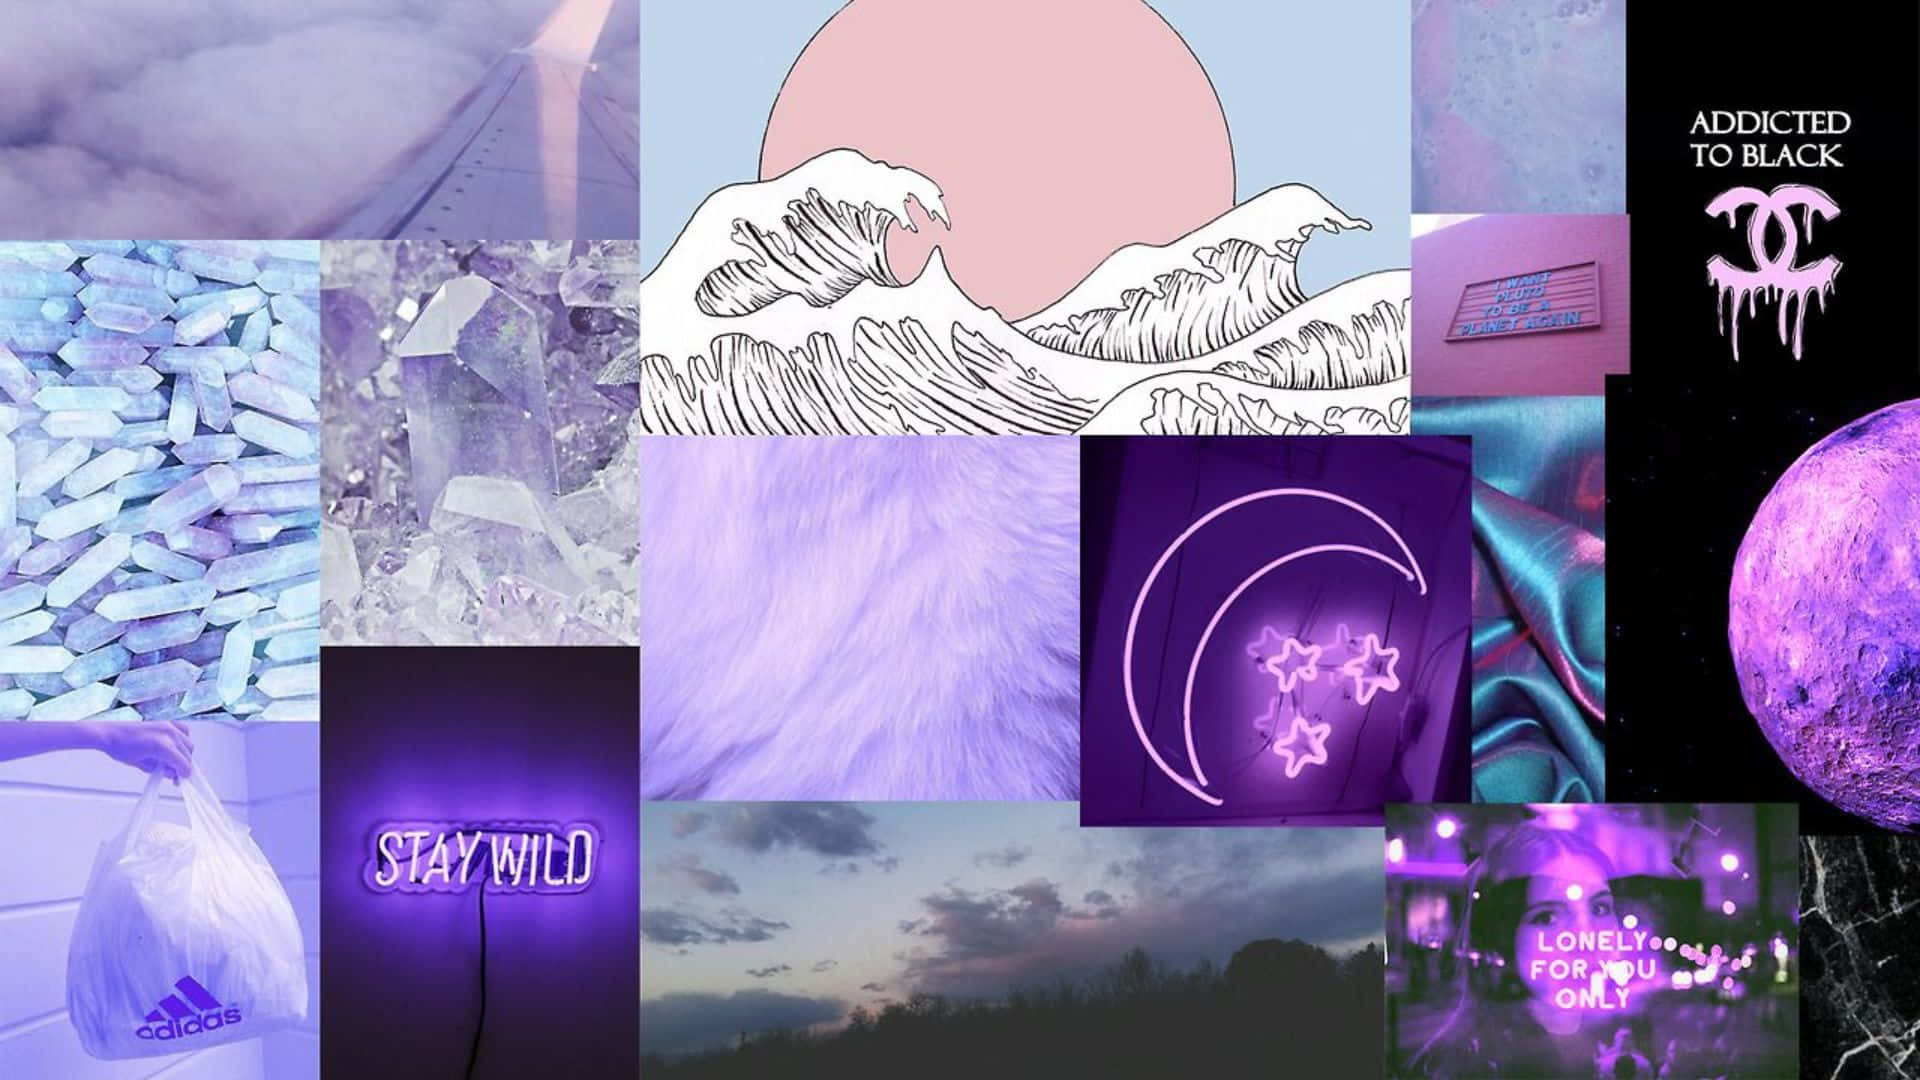 A dreamy purple aesthetic music collage Wallpaper